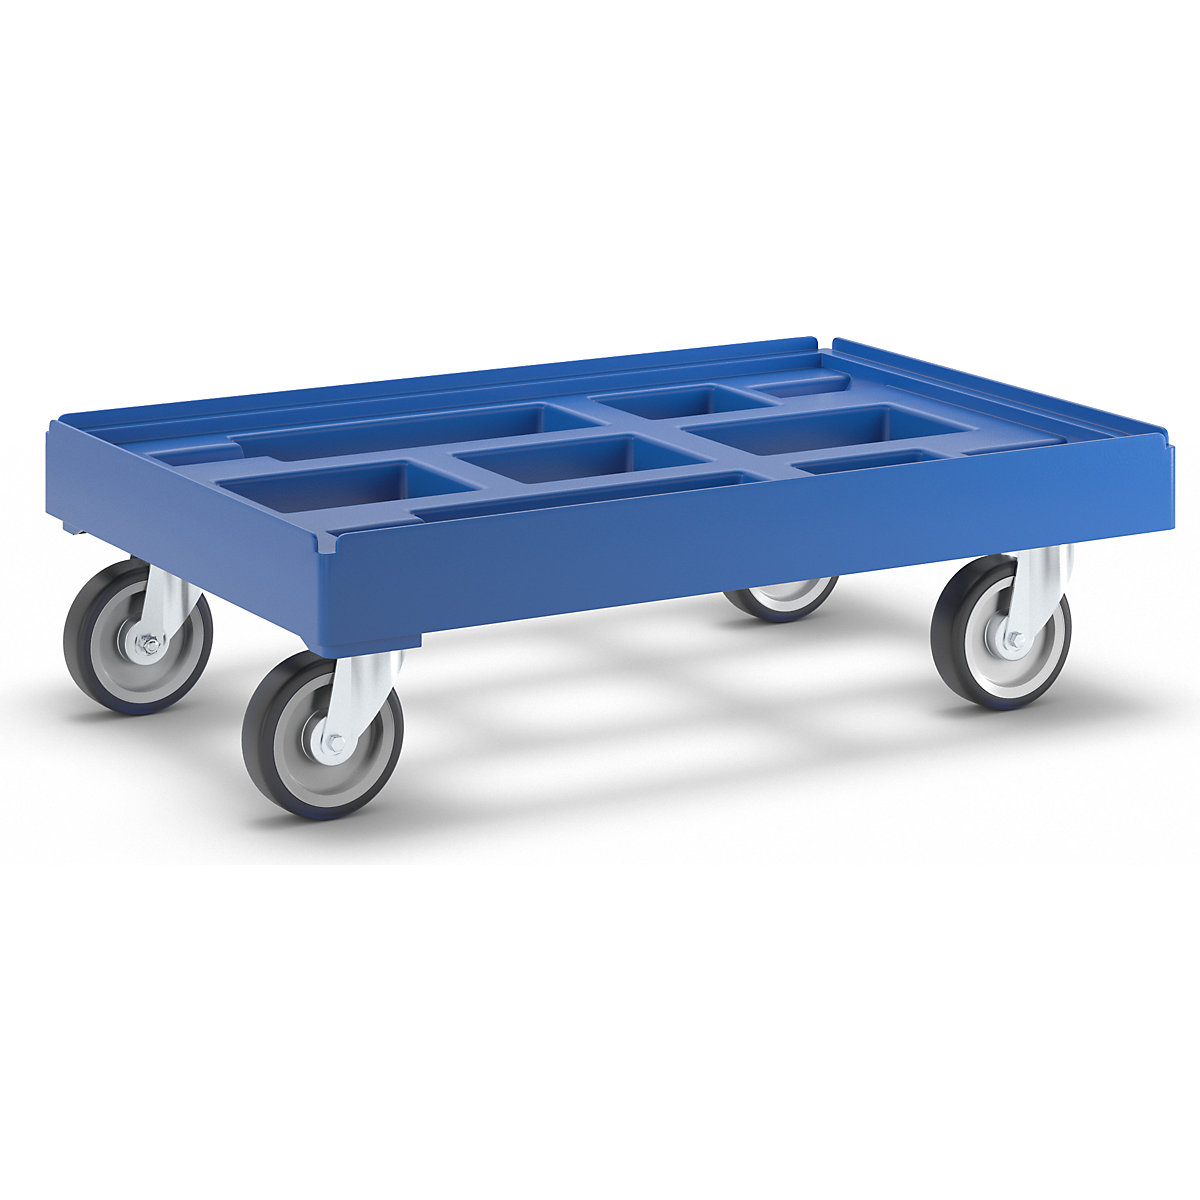 Transport dolly, LxW 610 x 410 mm, made of HDPE, gentian blue-9